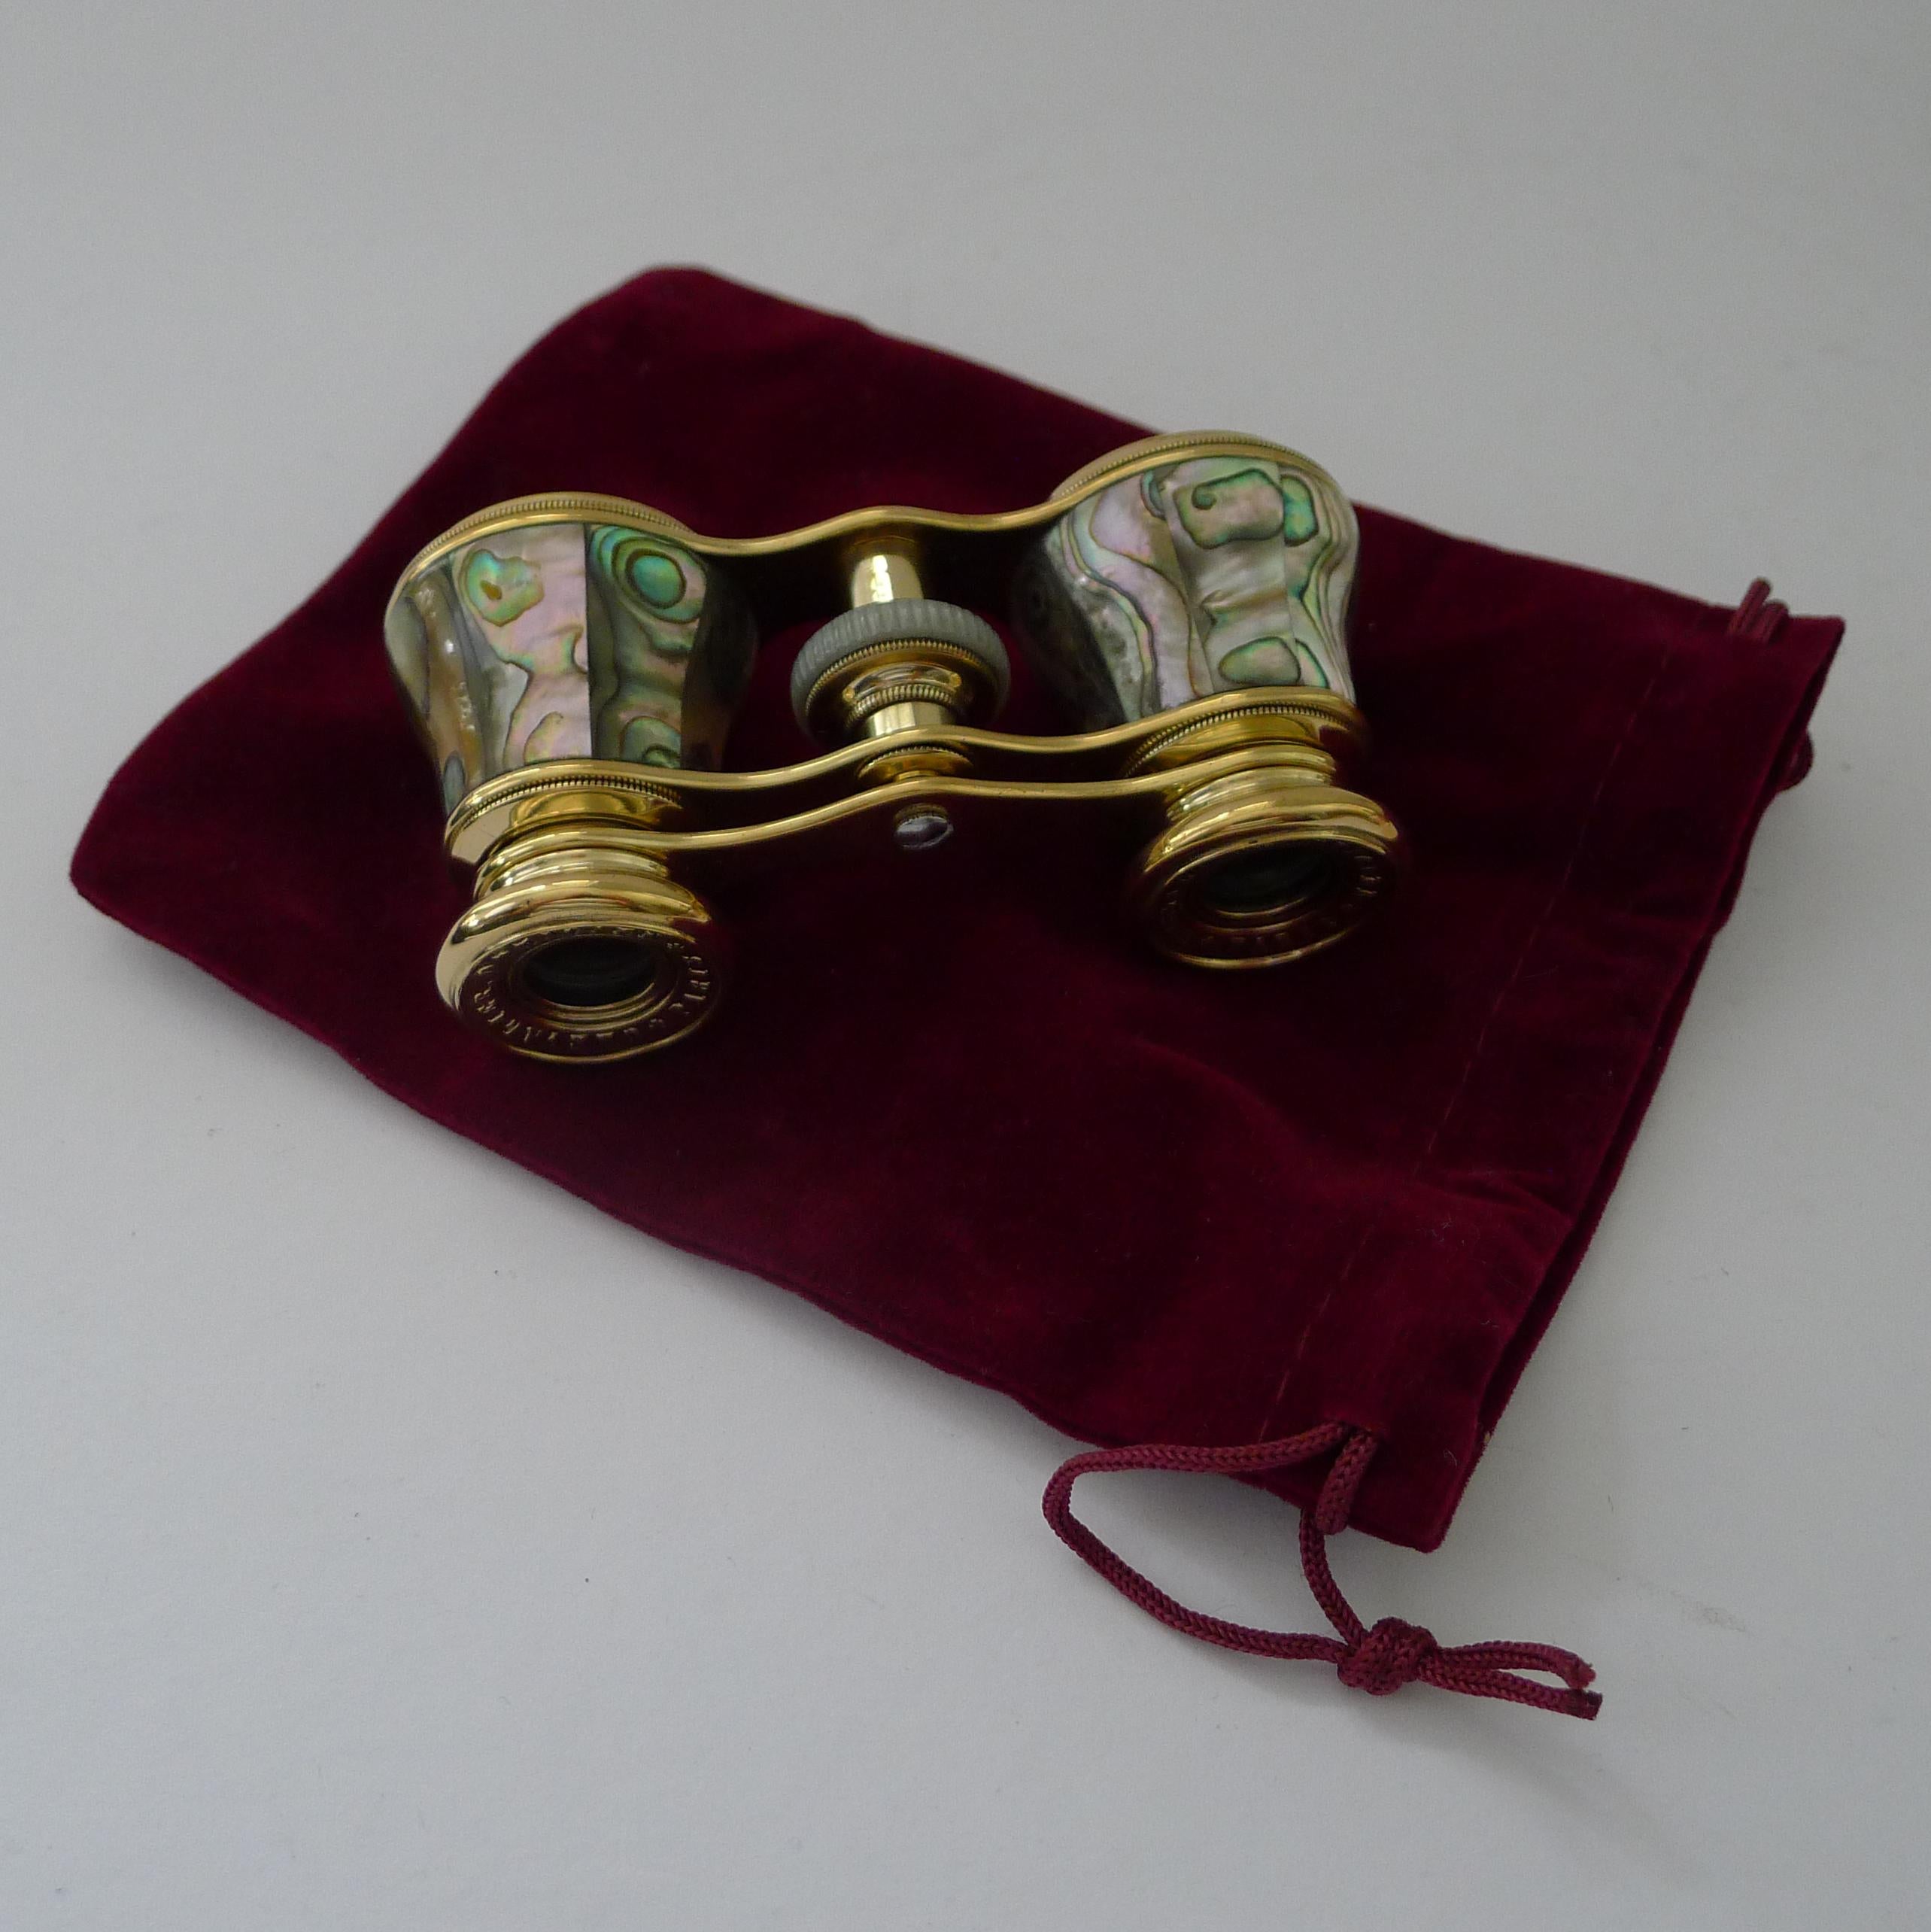 A truly exquisite pair of Opera Glasses by the well renowned French maker, Chevalier of Paris, signed on both eye pieces.

The glasses are made from polished brass and Abalone shell with it's rich colour and iridescent qualities. The optics are